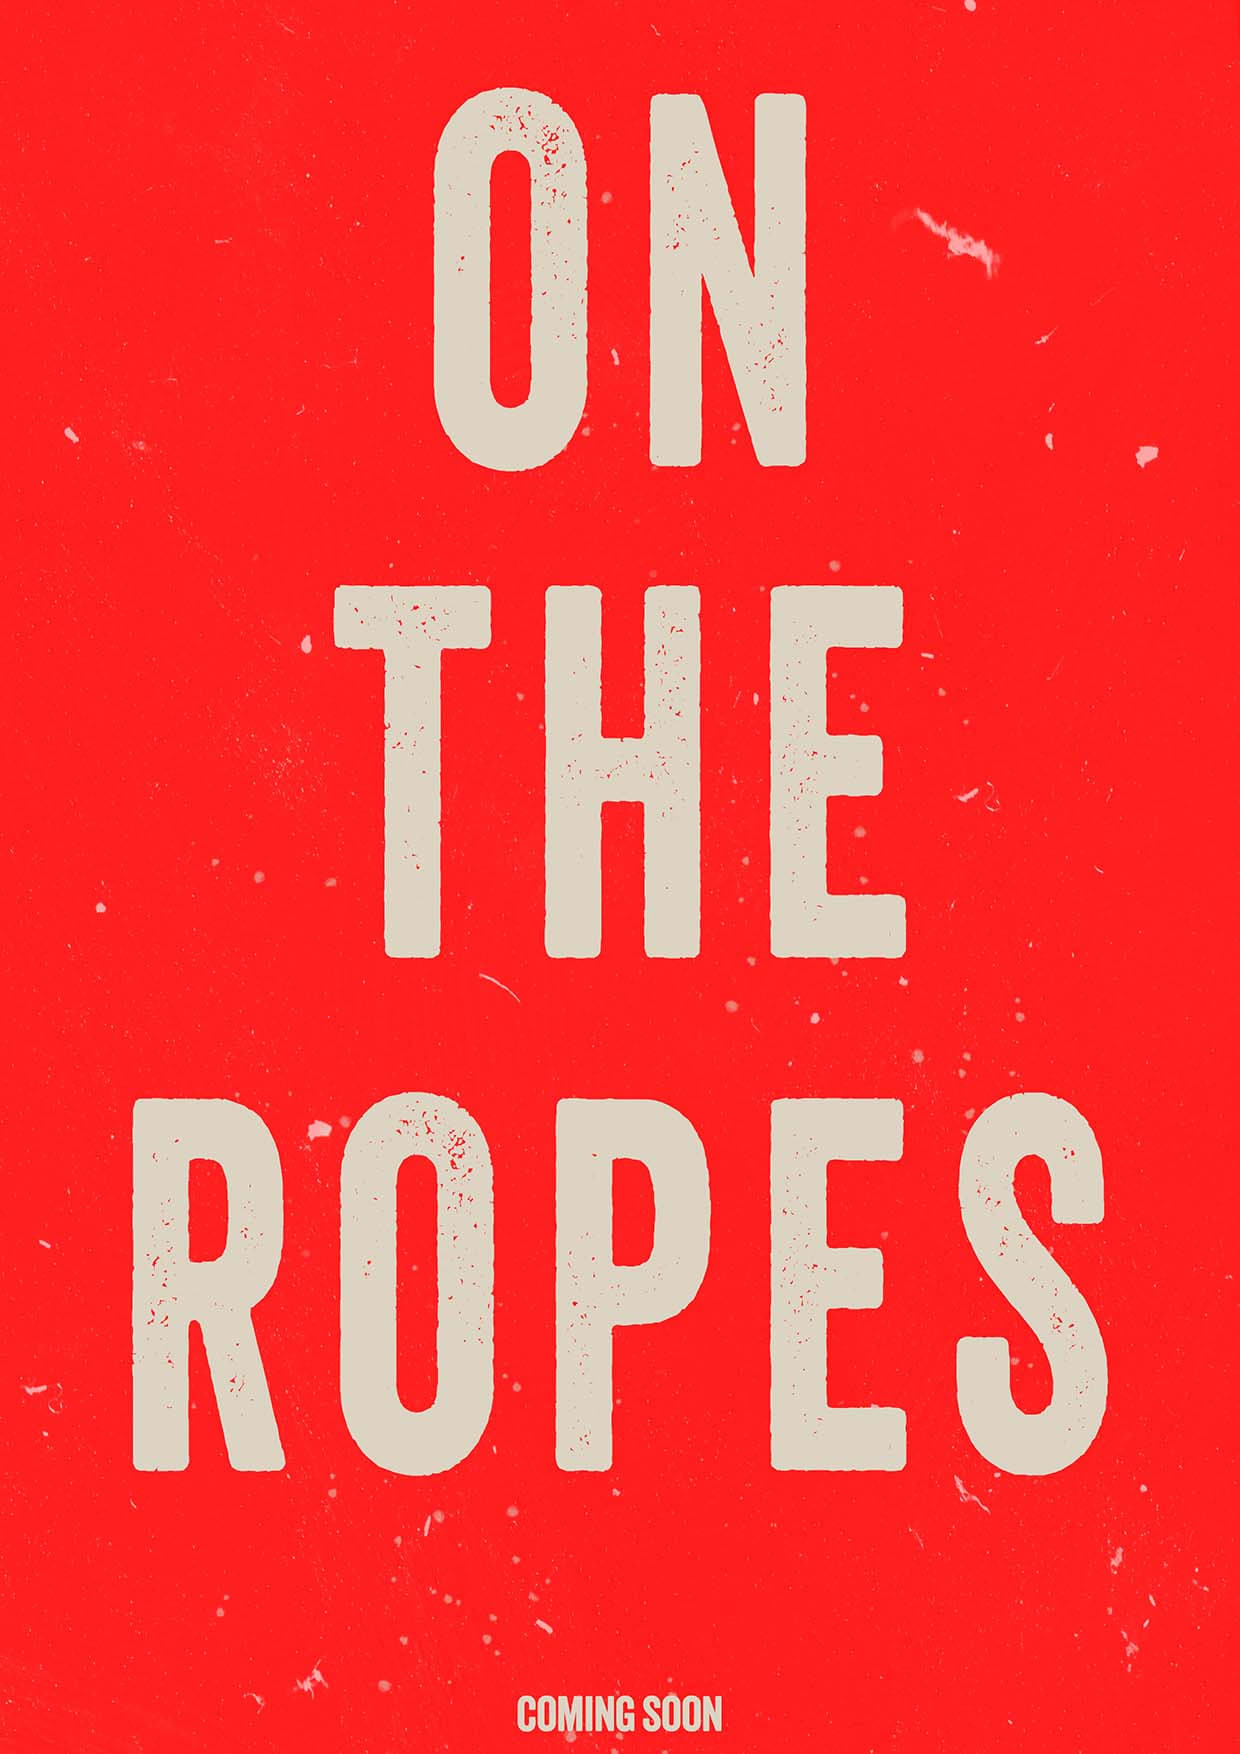 On The Ropes